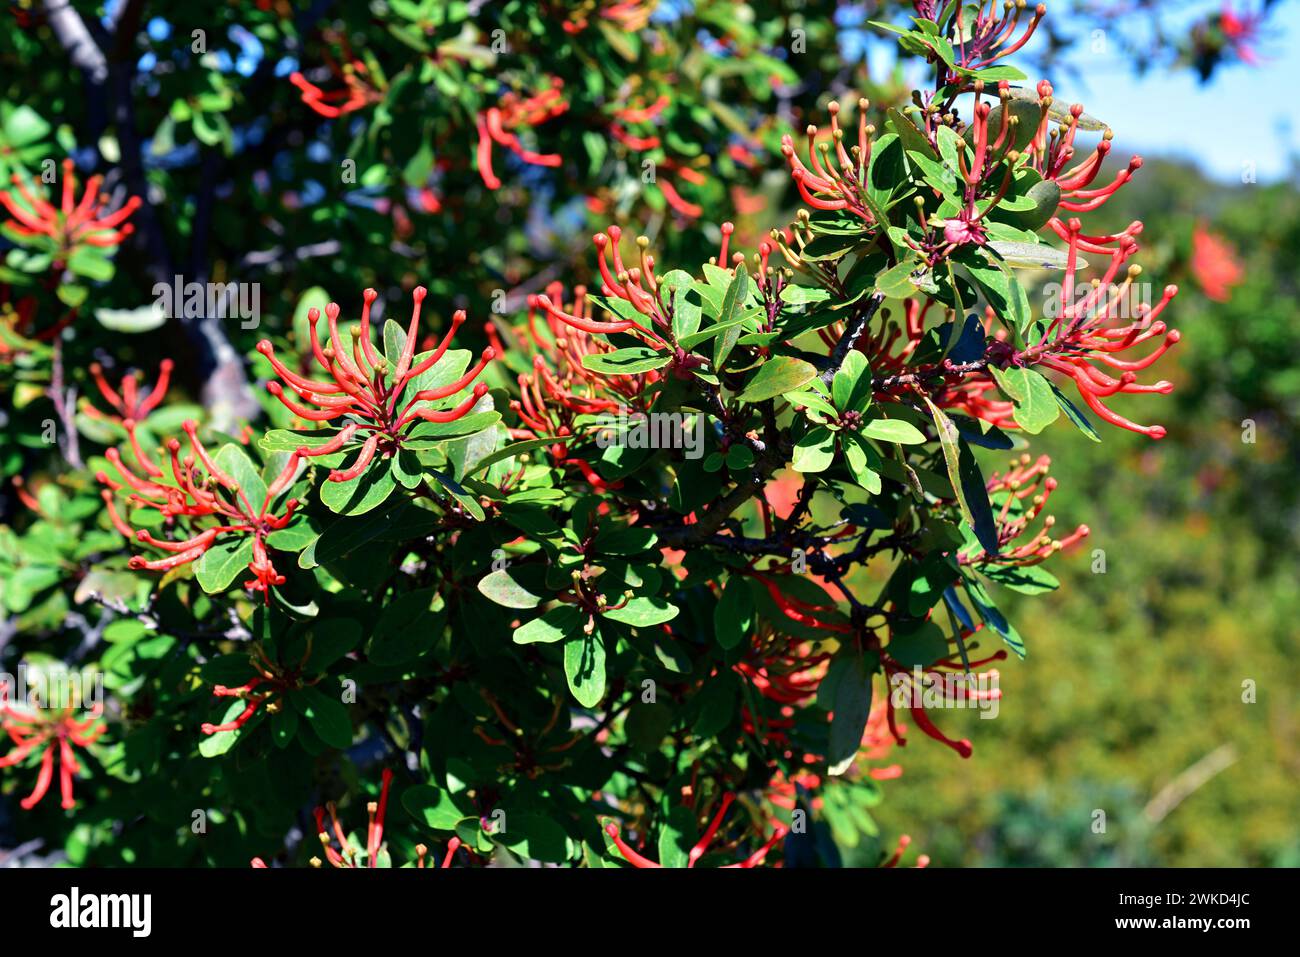 Notro or Chilean firetree (Embothrium coccineum) is a small evergreen tree native to temperate regions of Chile and Argentina. Flowers and leaves deta Stock Photo